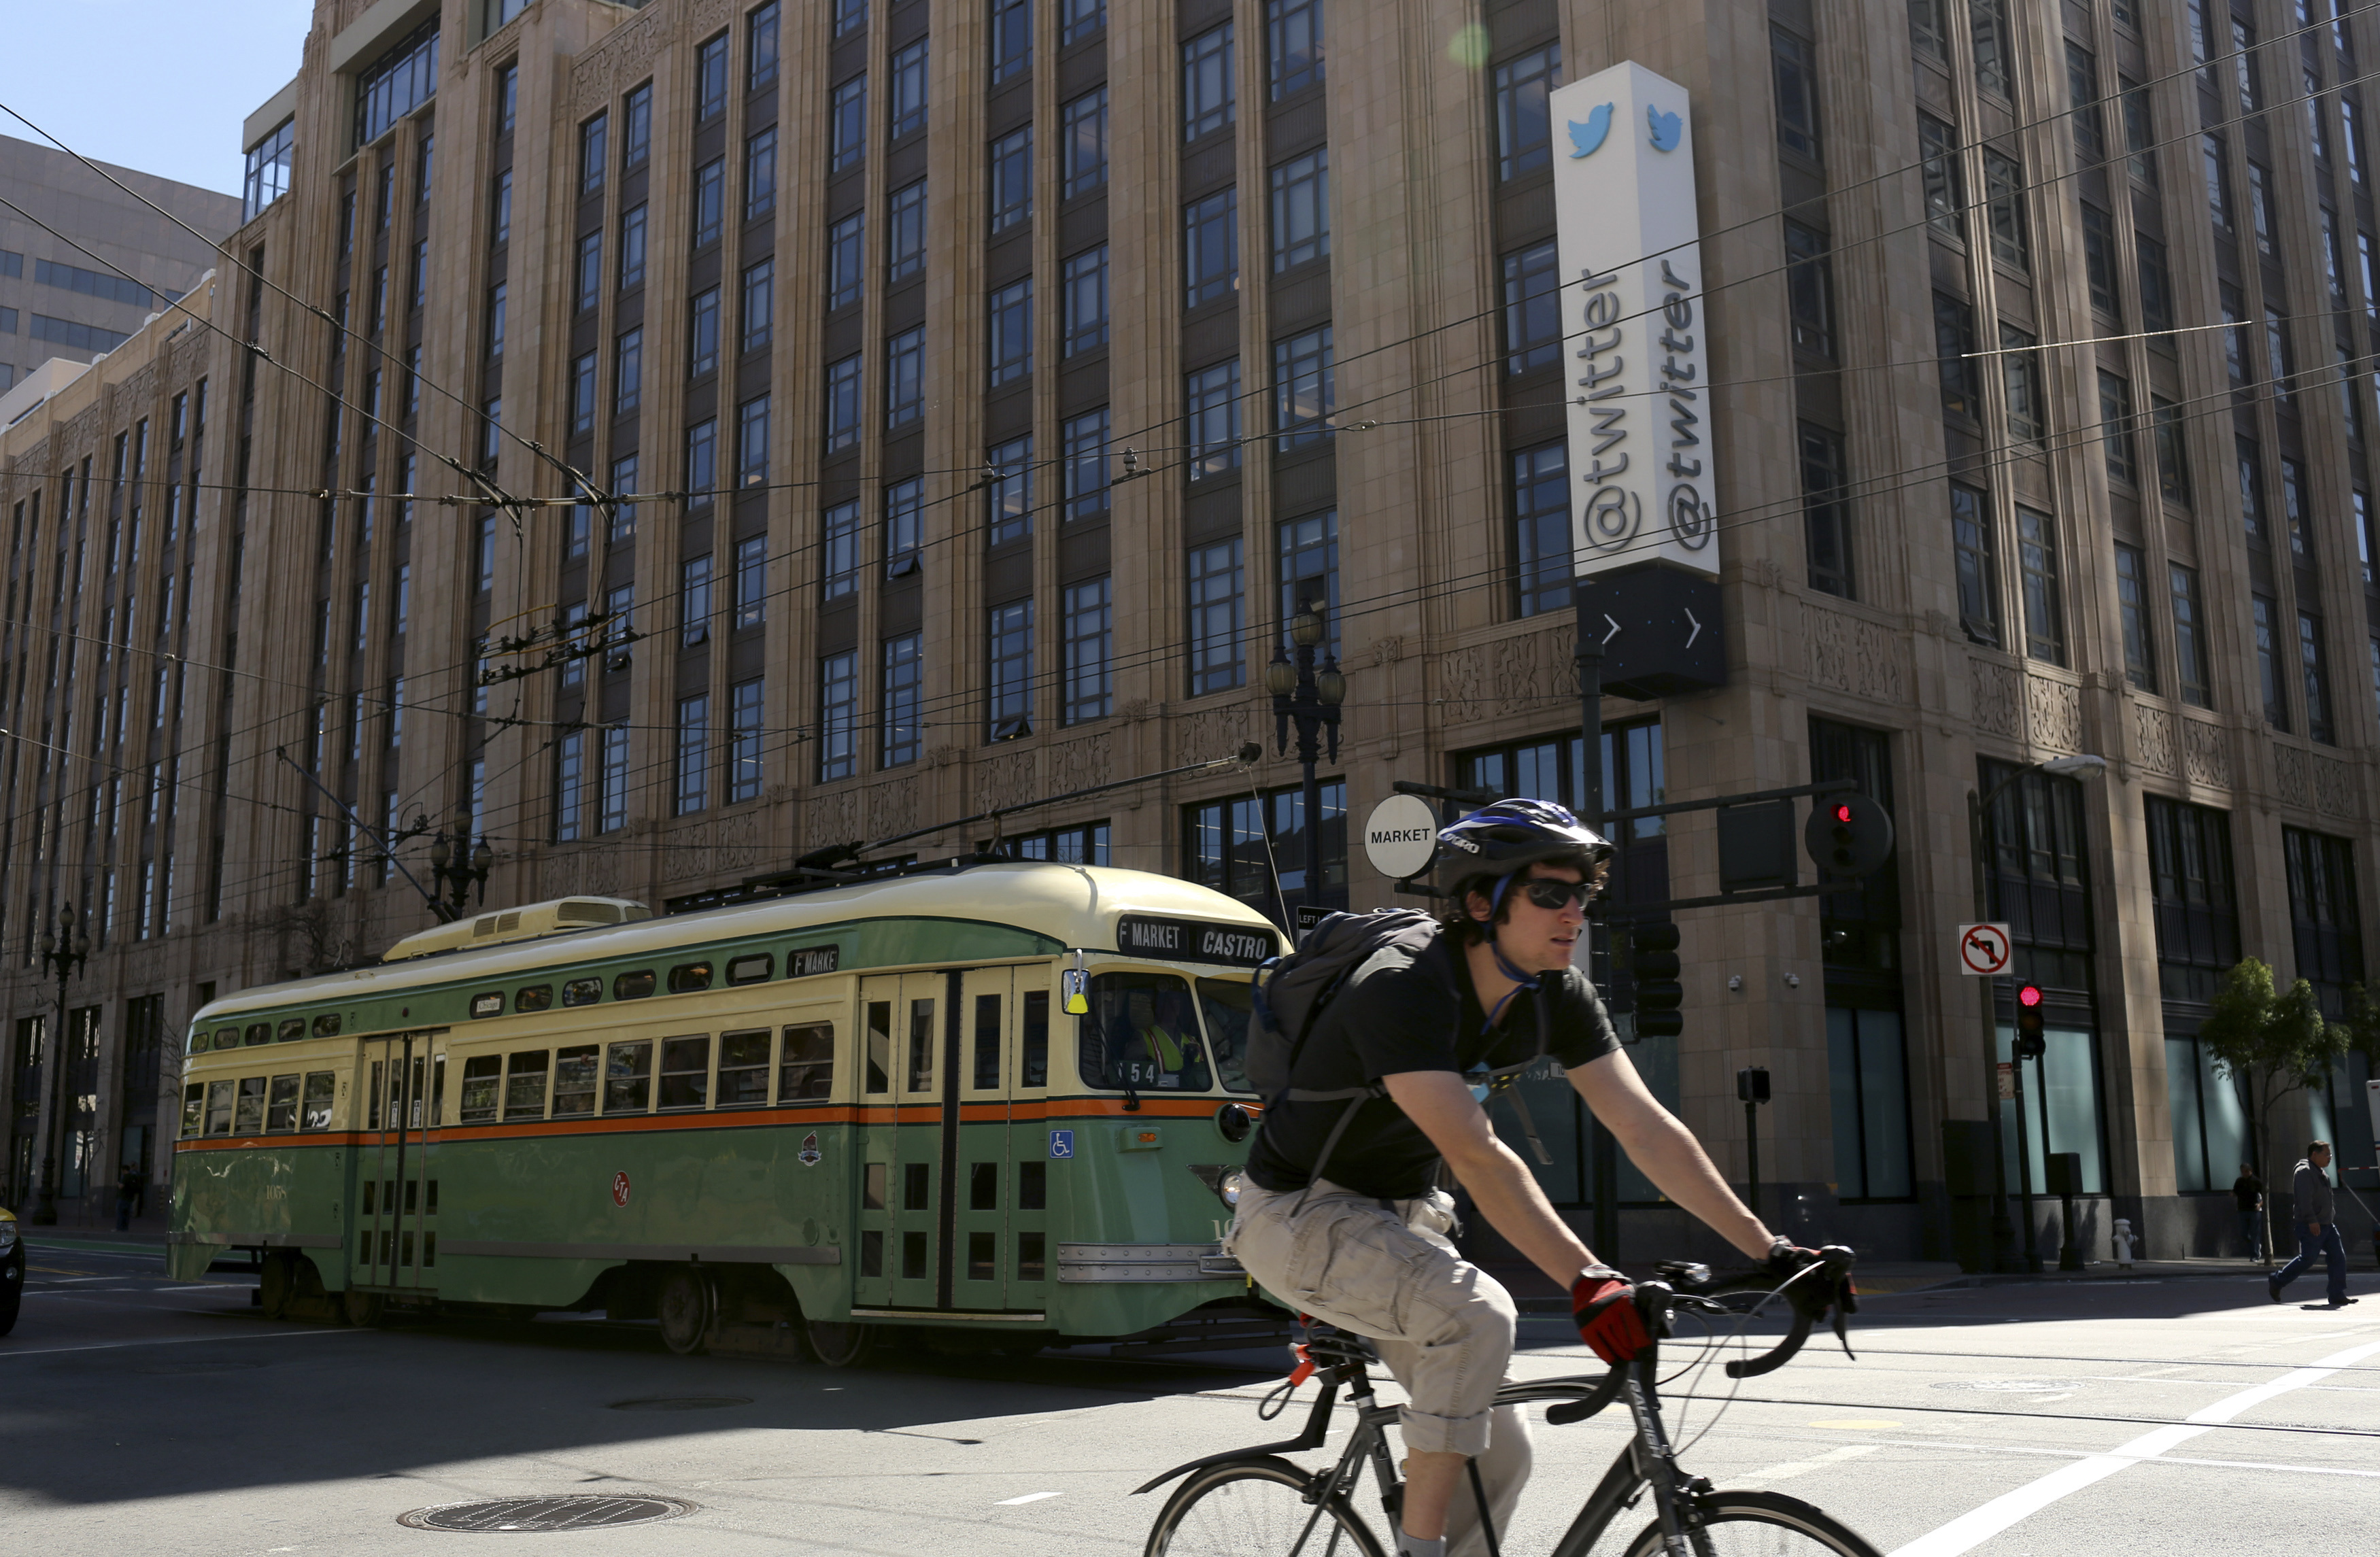 A vintage streetcar passes in front of the Twitter headquarters on Market Street in San Francisco